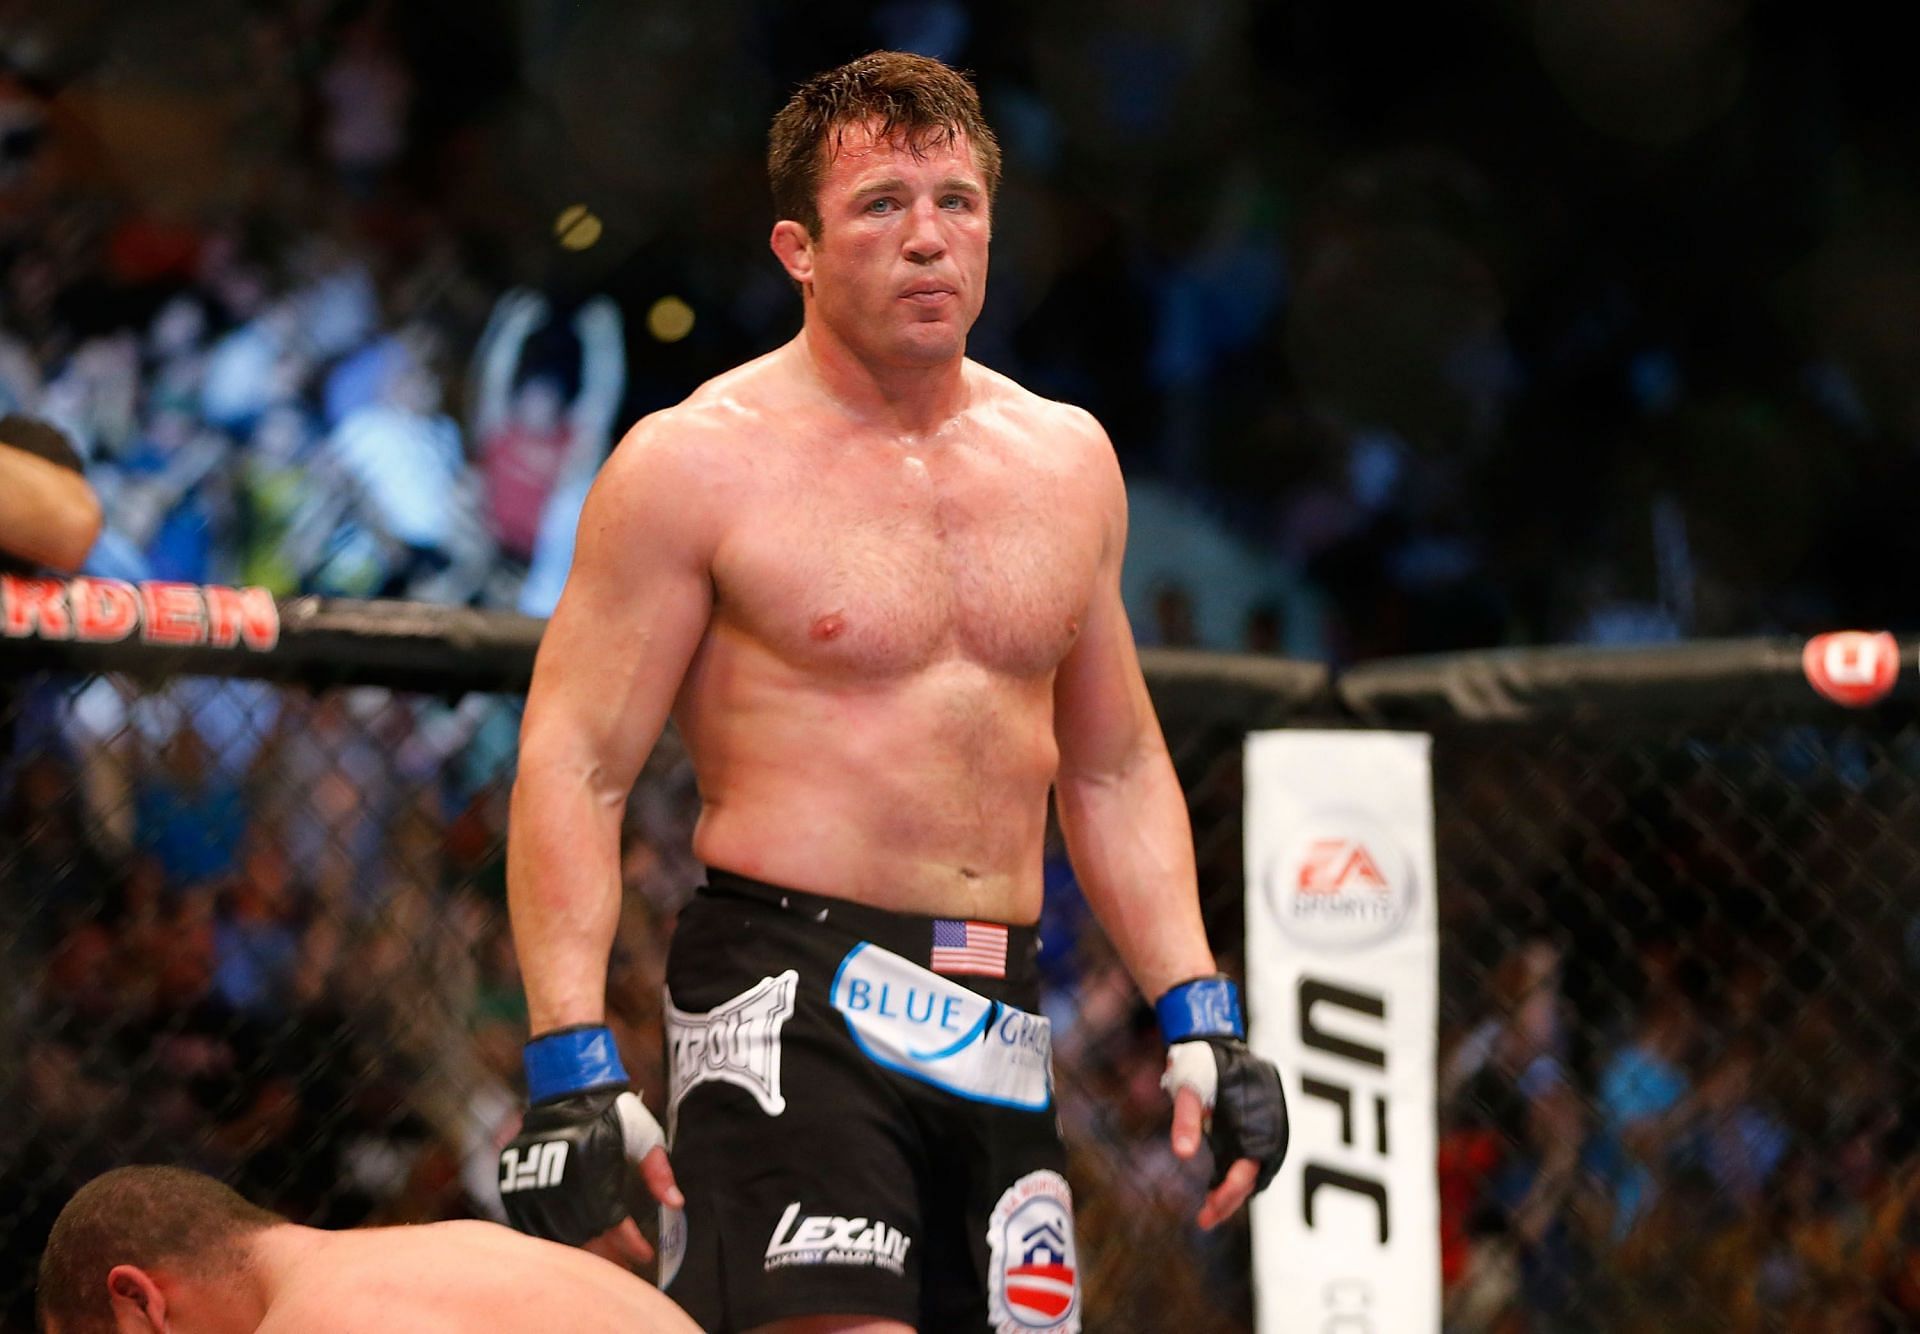 Silva led the series between Sonnen and himself 2-0